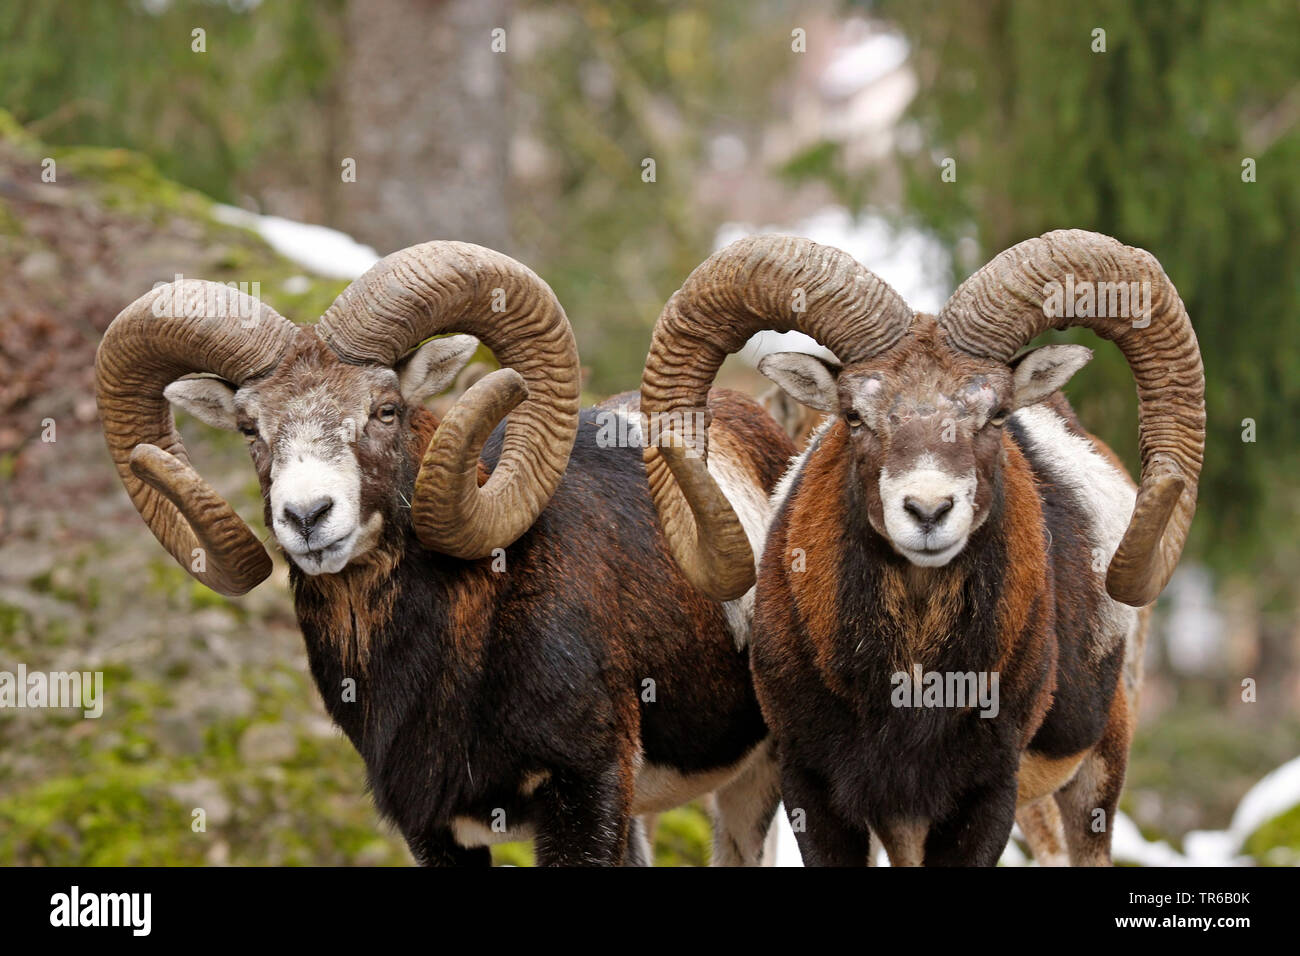 Mouflon (Ovis musimon, Ovis gmelini musimon, Ovis orientalis musimon), two rams standing side by side in a forest, with stupendous horns, Germany Stock Photo